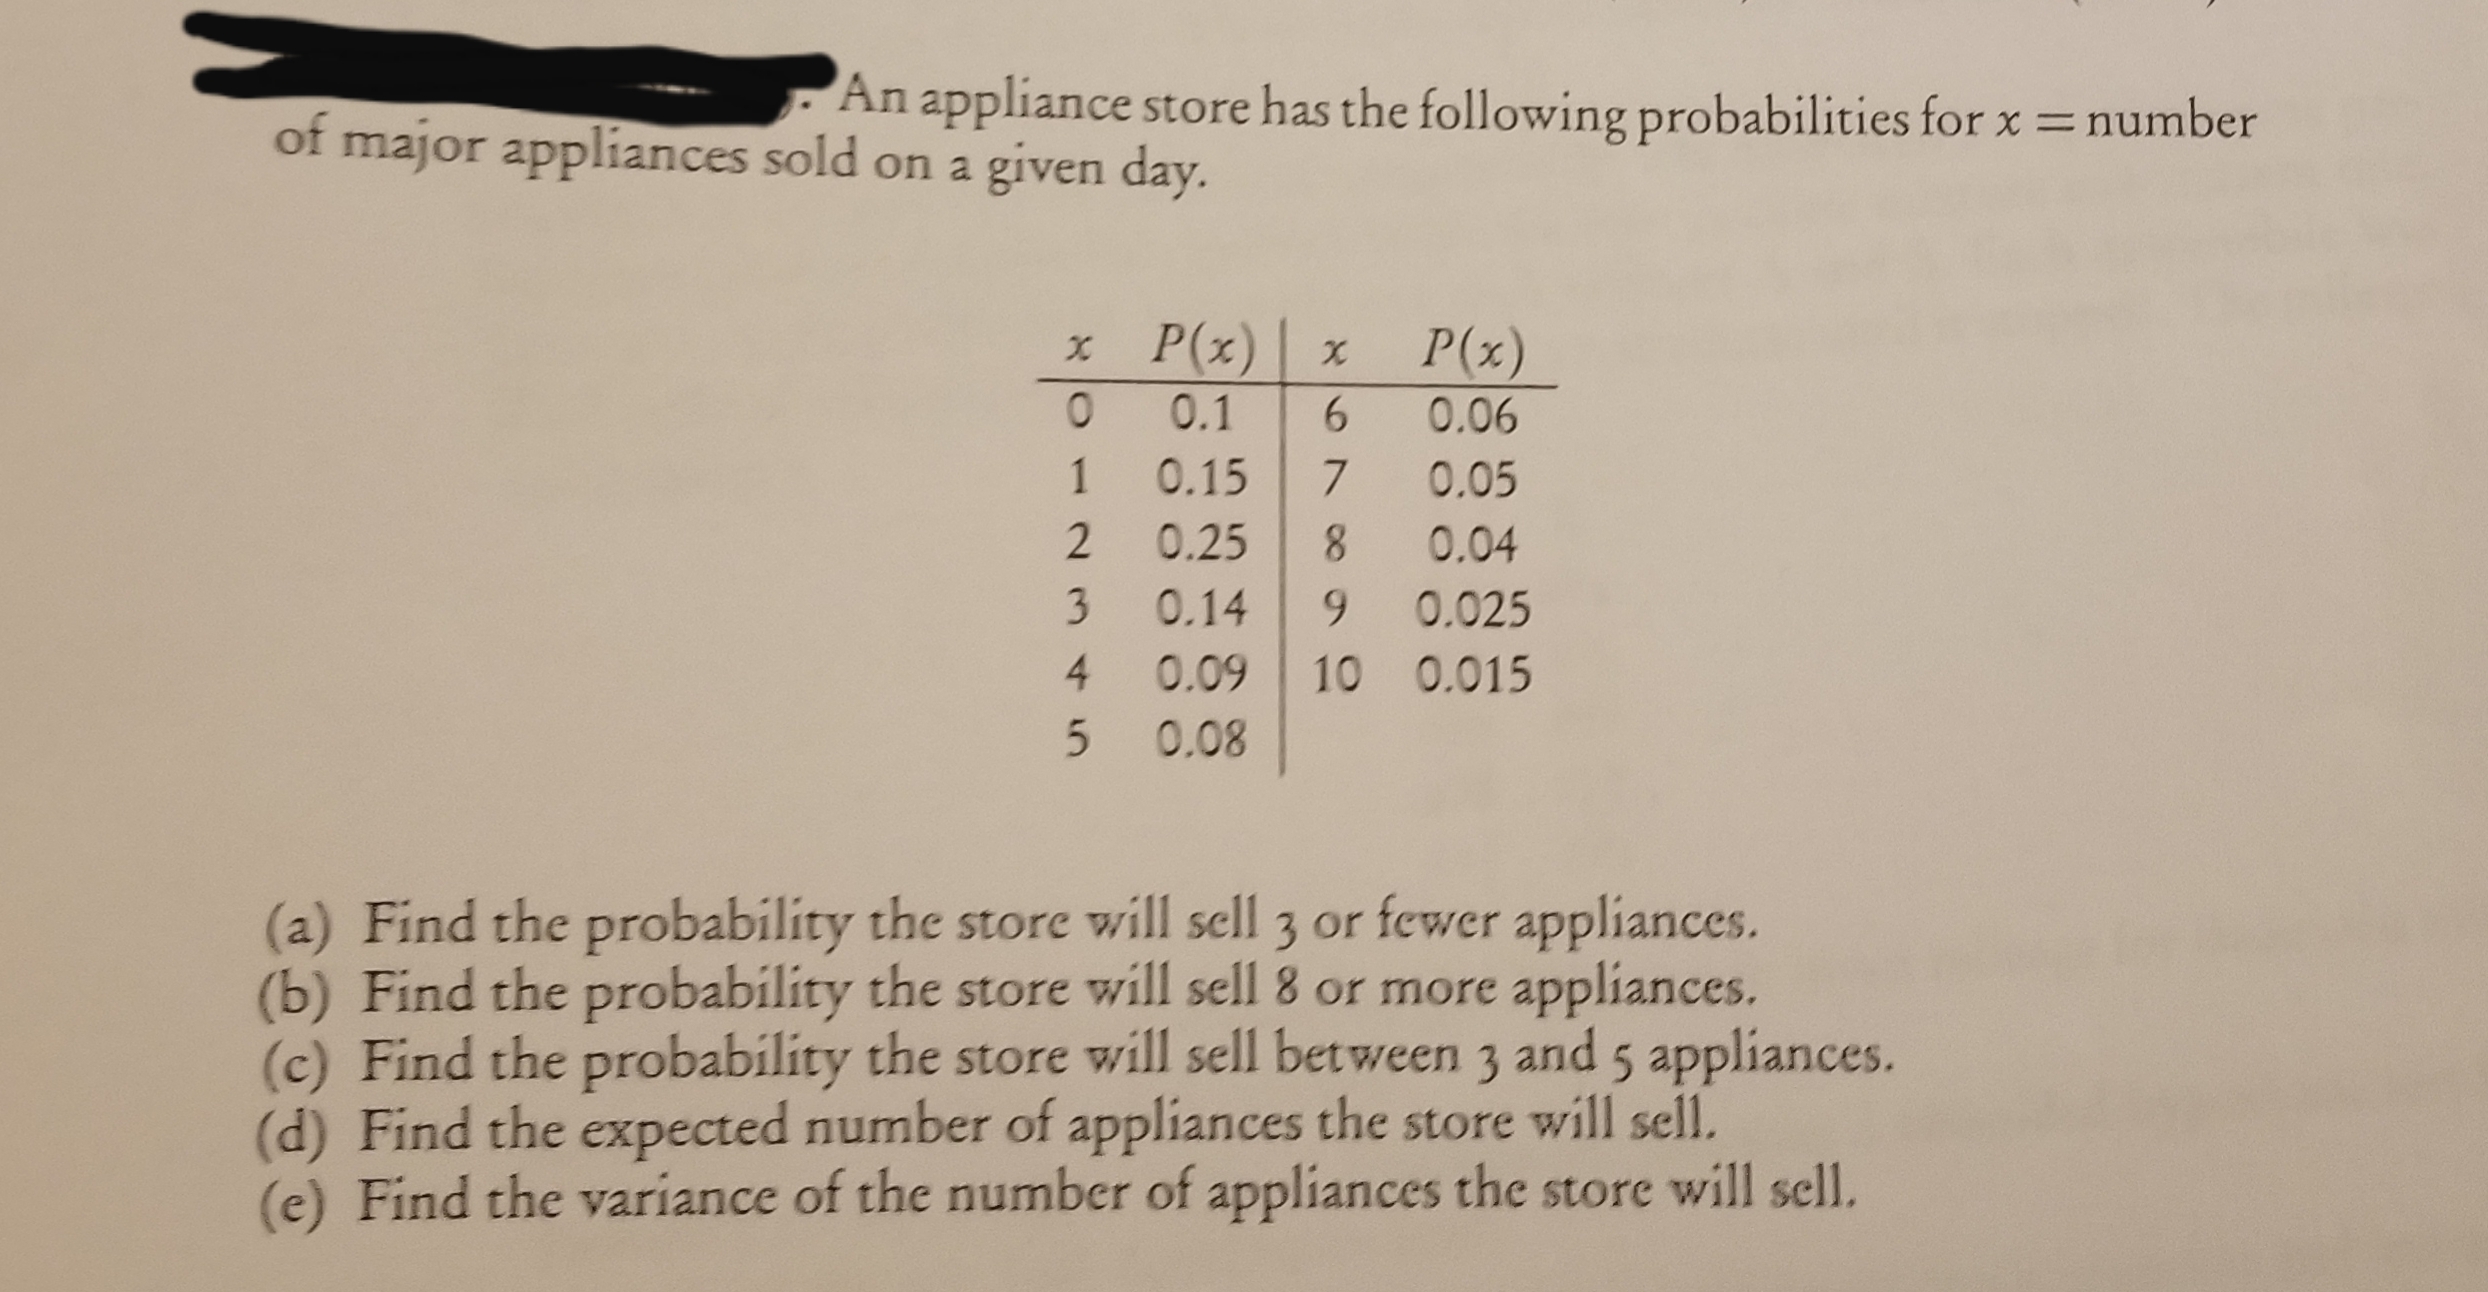 An appliance store has the following probabilities for x =number
of major appliances sold on a given day.
x P(x)
P(x)
0.1
0.06
0.15
0.05
0.25
8.
0.04
9.
0.14
0.025
4.
0.09
10 0.015
0.08
lity the store will sell 3 or fewer appliances.
(a) Find the probability
(b) Find the probability the store will sell 8 or more appliances.
(c) Find the probability the store will sell between 3 and 5 appliances.
(d) Find the expected number of appliances the store will sell.
(e) Find the variance of the number of appliances the store will sell.
